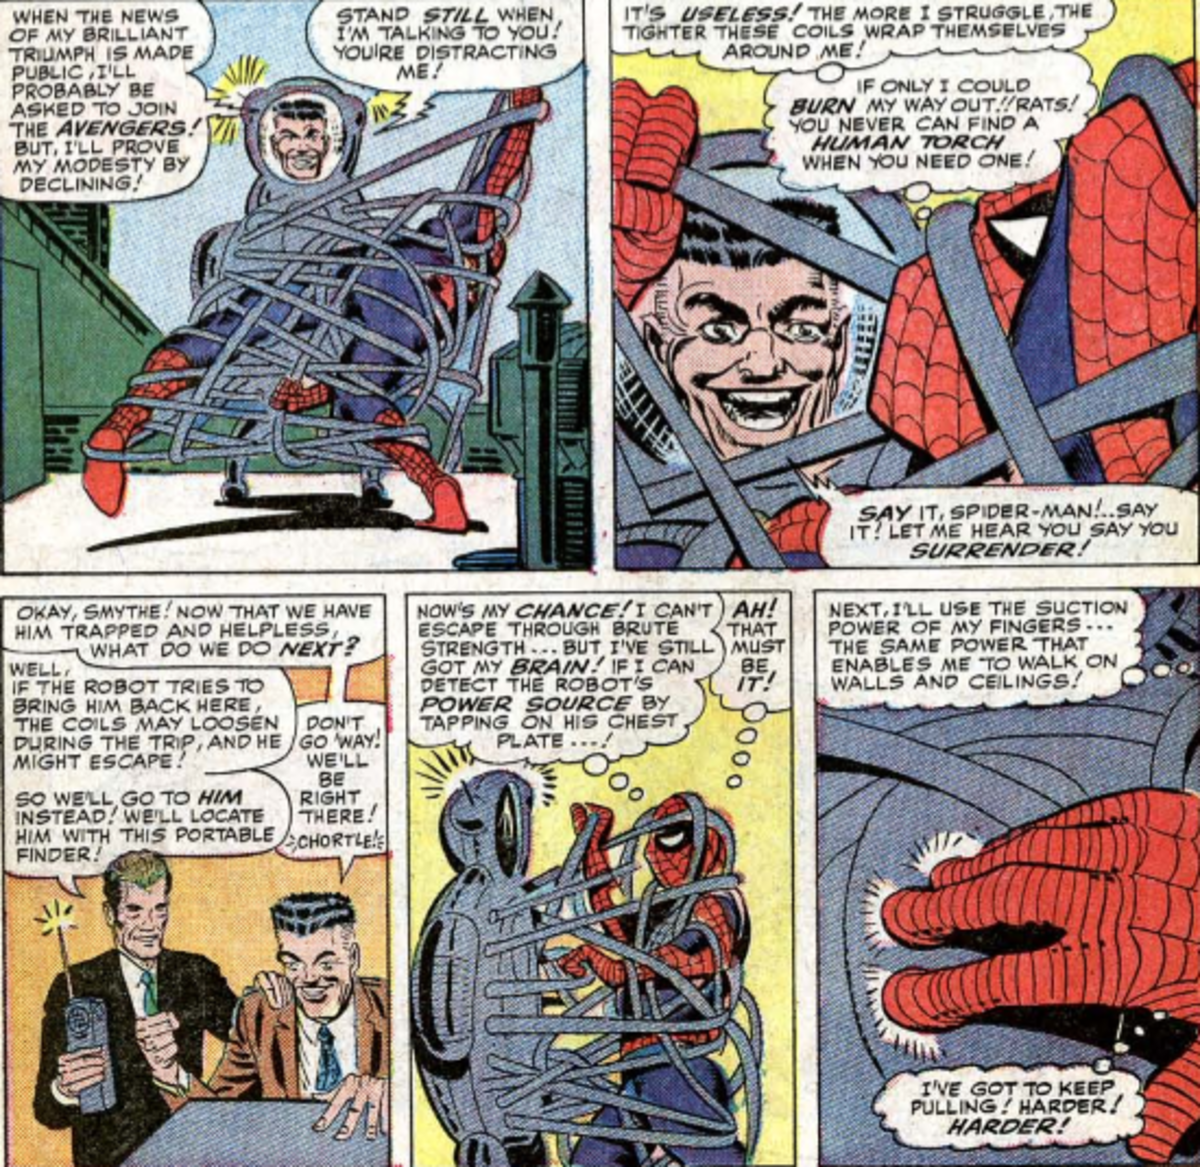 5-of-the-best-amazing-spider-man-stories-by-stan-lee